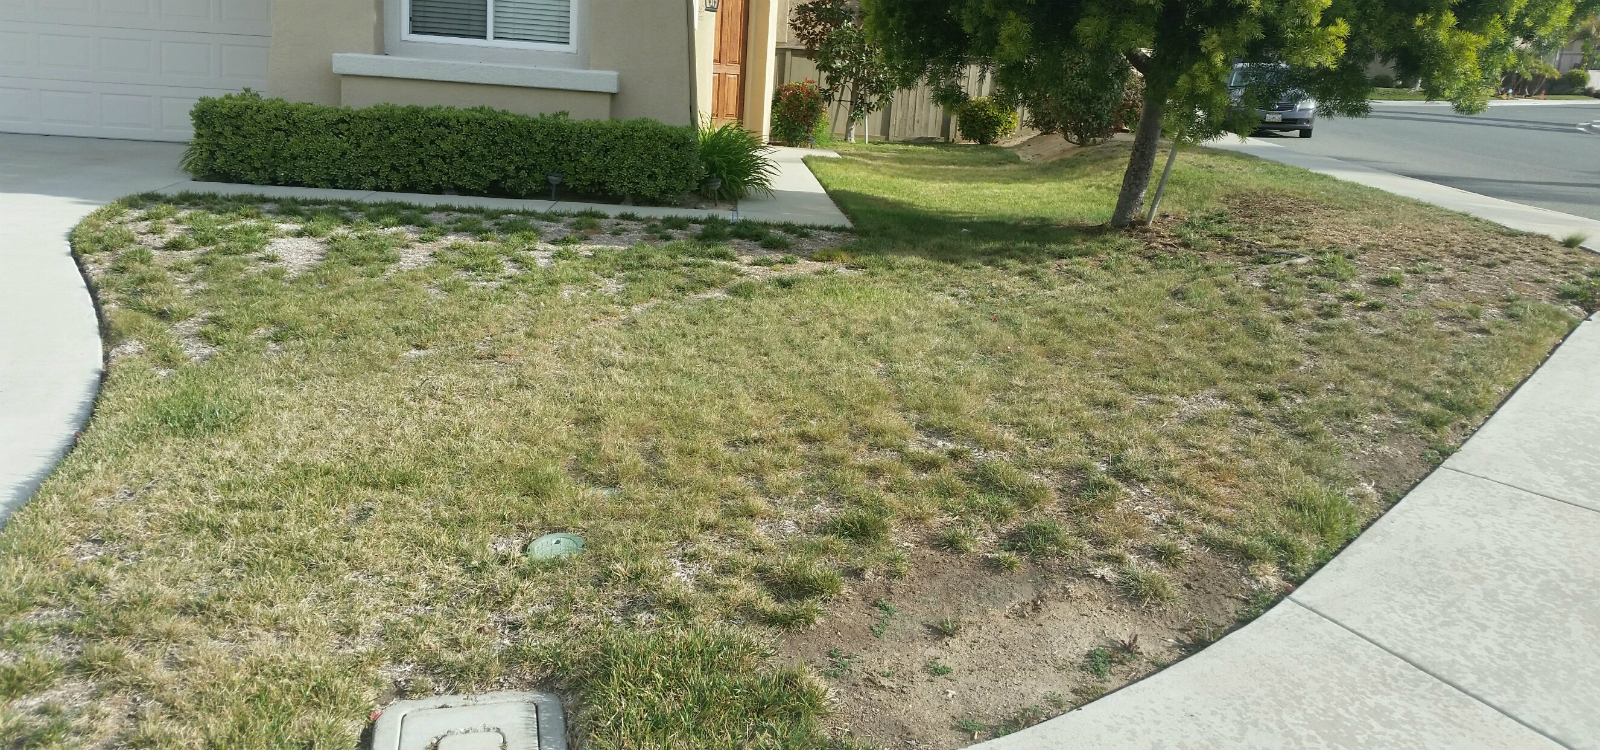 <div class='slider_caption'>		 <h1>Isn't It Time To Replace That Tired Old Lawn?</h1>			<a class='slider-readmore' href='http://www.plantswithaplan.com/index.php/front-yard-facelift/'>Front Yard Facelift</a>
			</div>